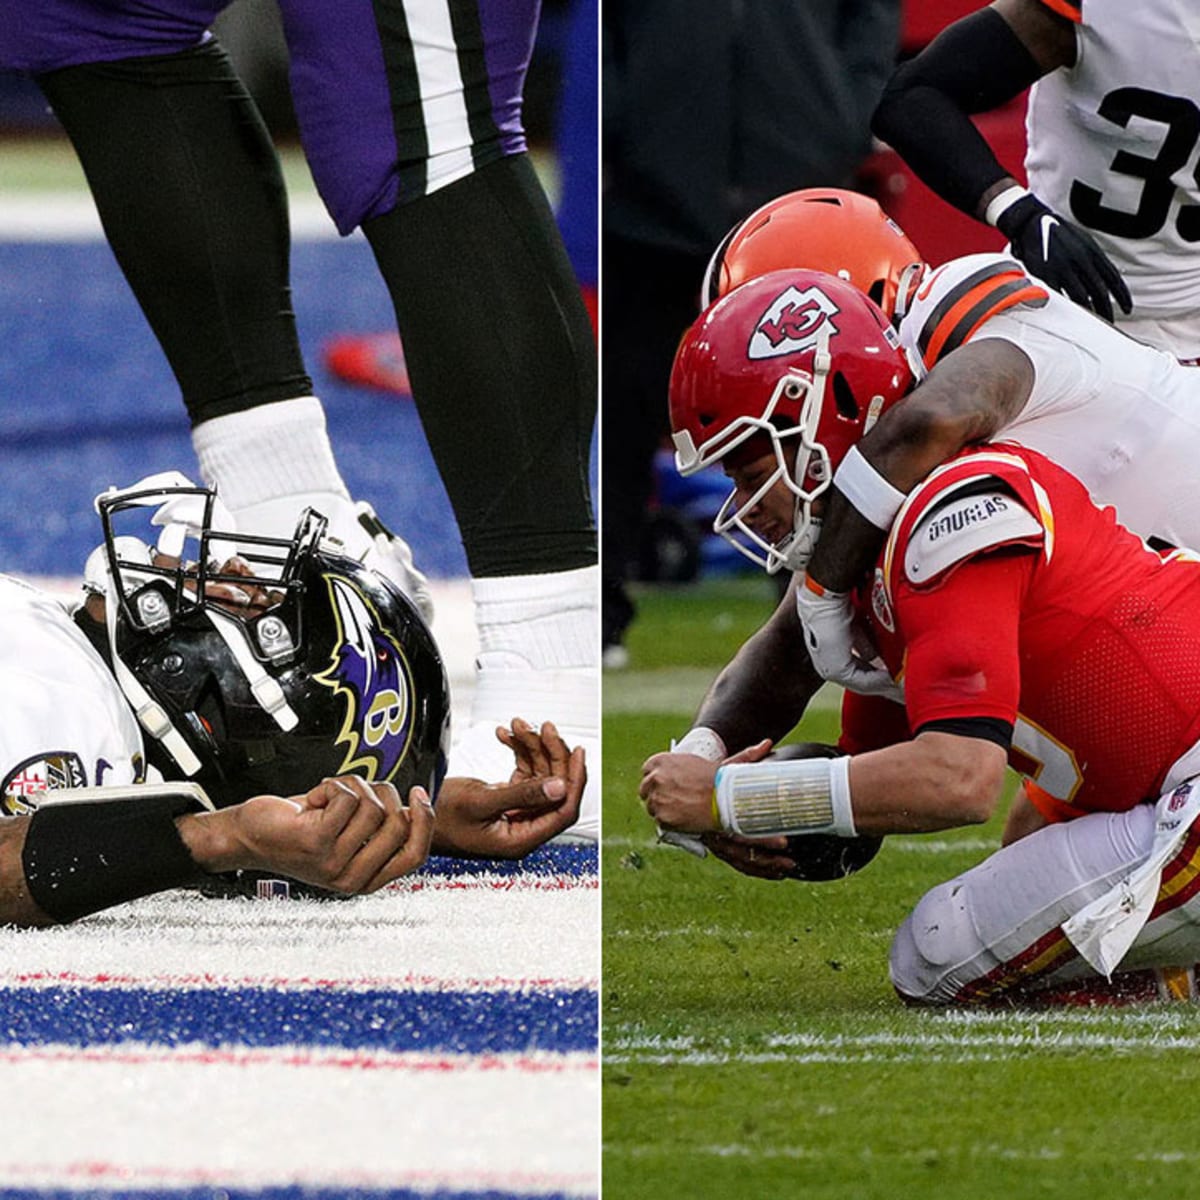 NFL playoffs 2021: Ravens' Lamar Jackson (concussion) knocked out of  divisional round vs. Bills